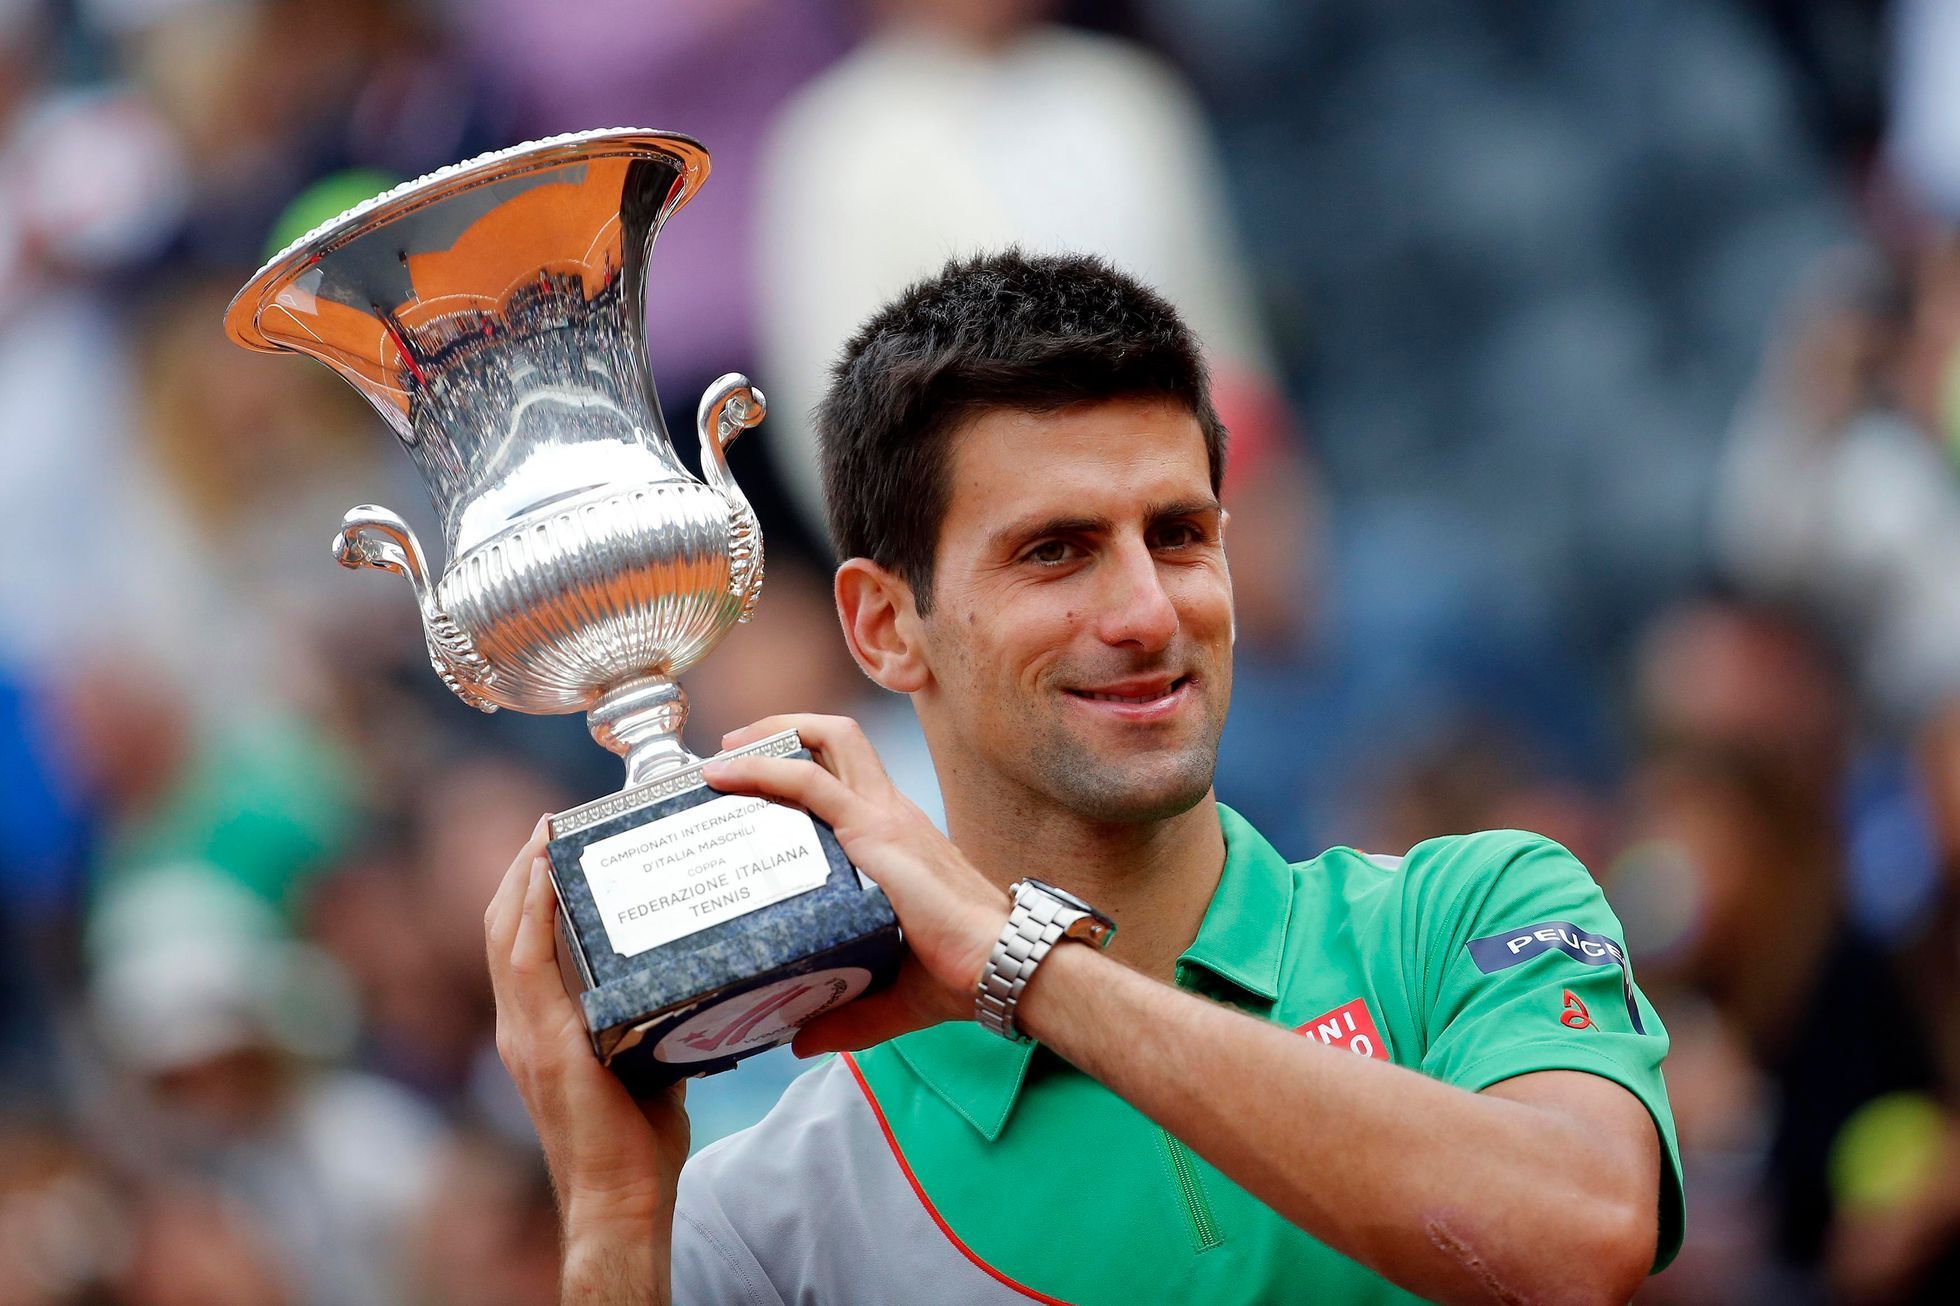 Djokovic of Serbia holds the trophy after winning the men's singles final match against Nadal of Spain at the Rome Masters tennis tournament